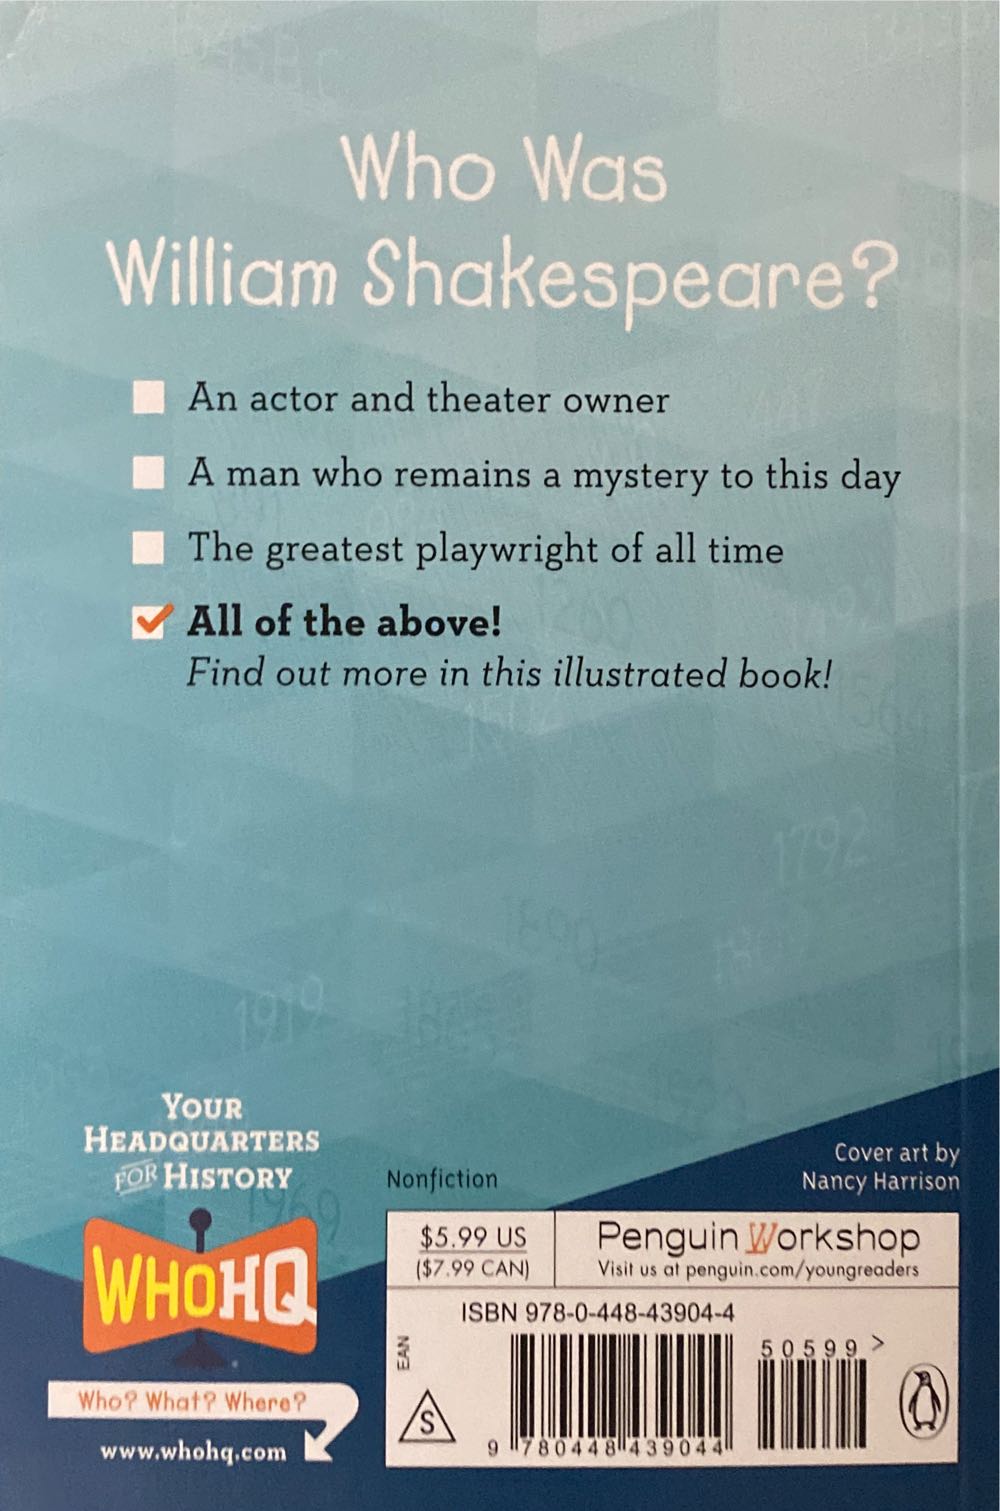 Who Was William Shakespeare? - Who HQ (Penguin Workshop - Paperback) book collectible [Barcode 9780448439044] - Main Image 2